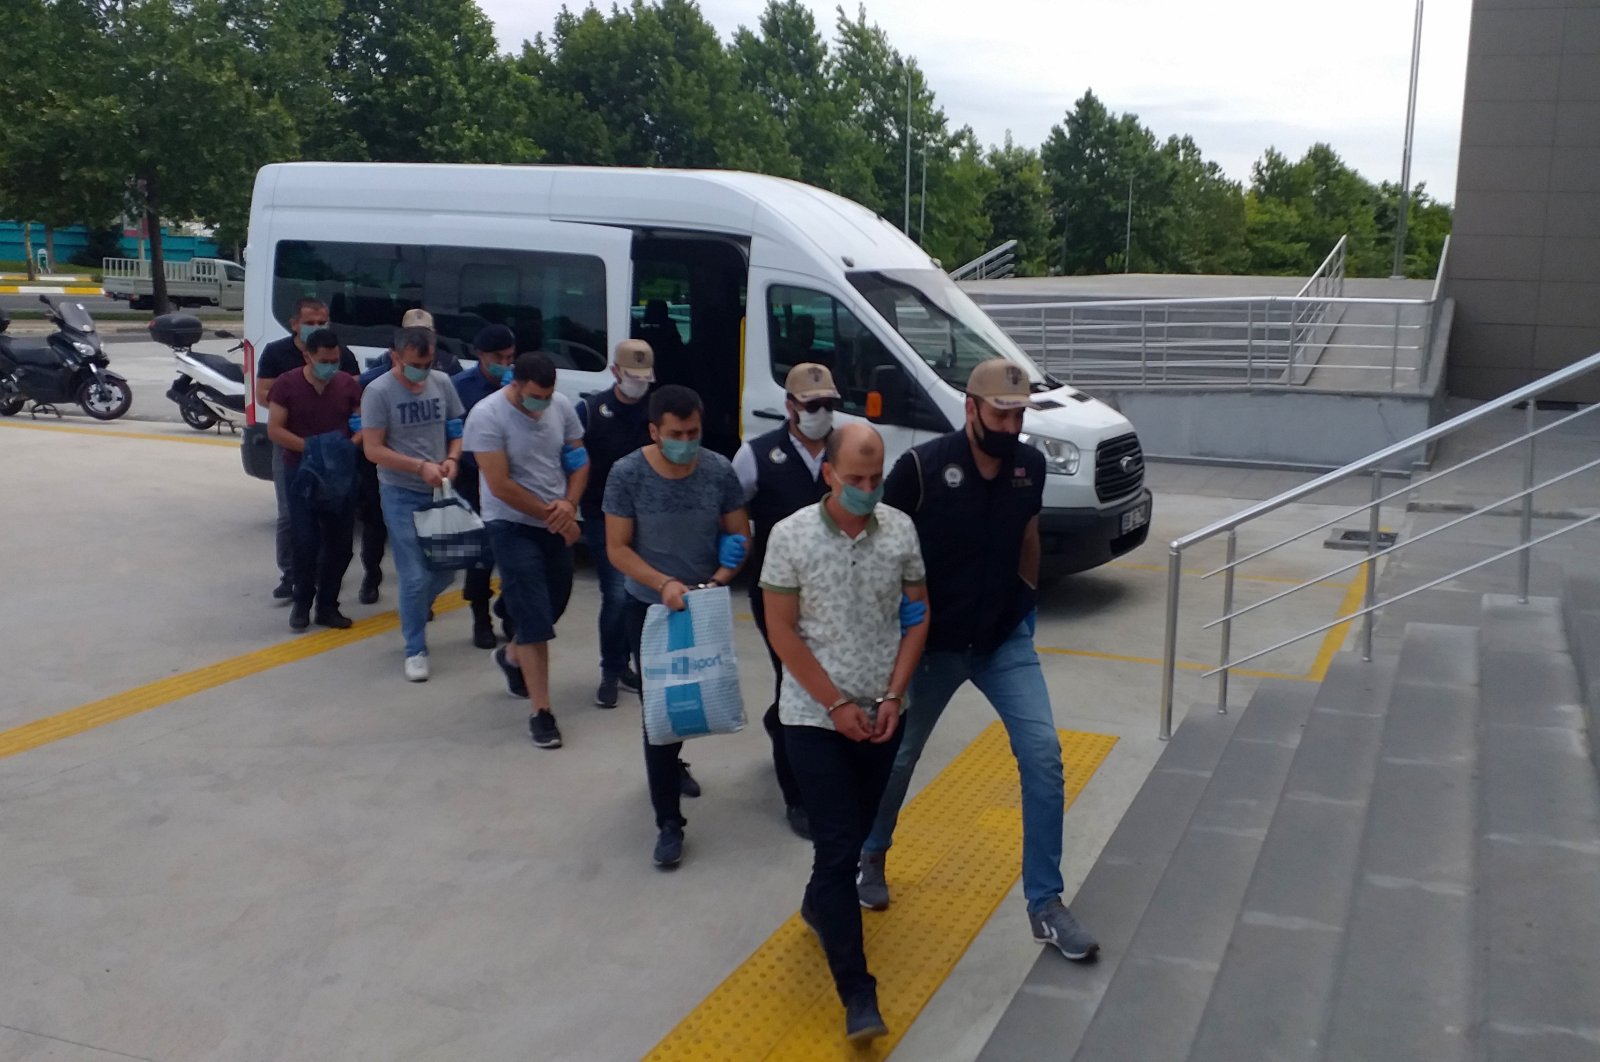 Police escort FETÖ suspects to the courthouse after an operation in Tekirdağ, Turkey, July 8, 2020. (IHA Photo)